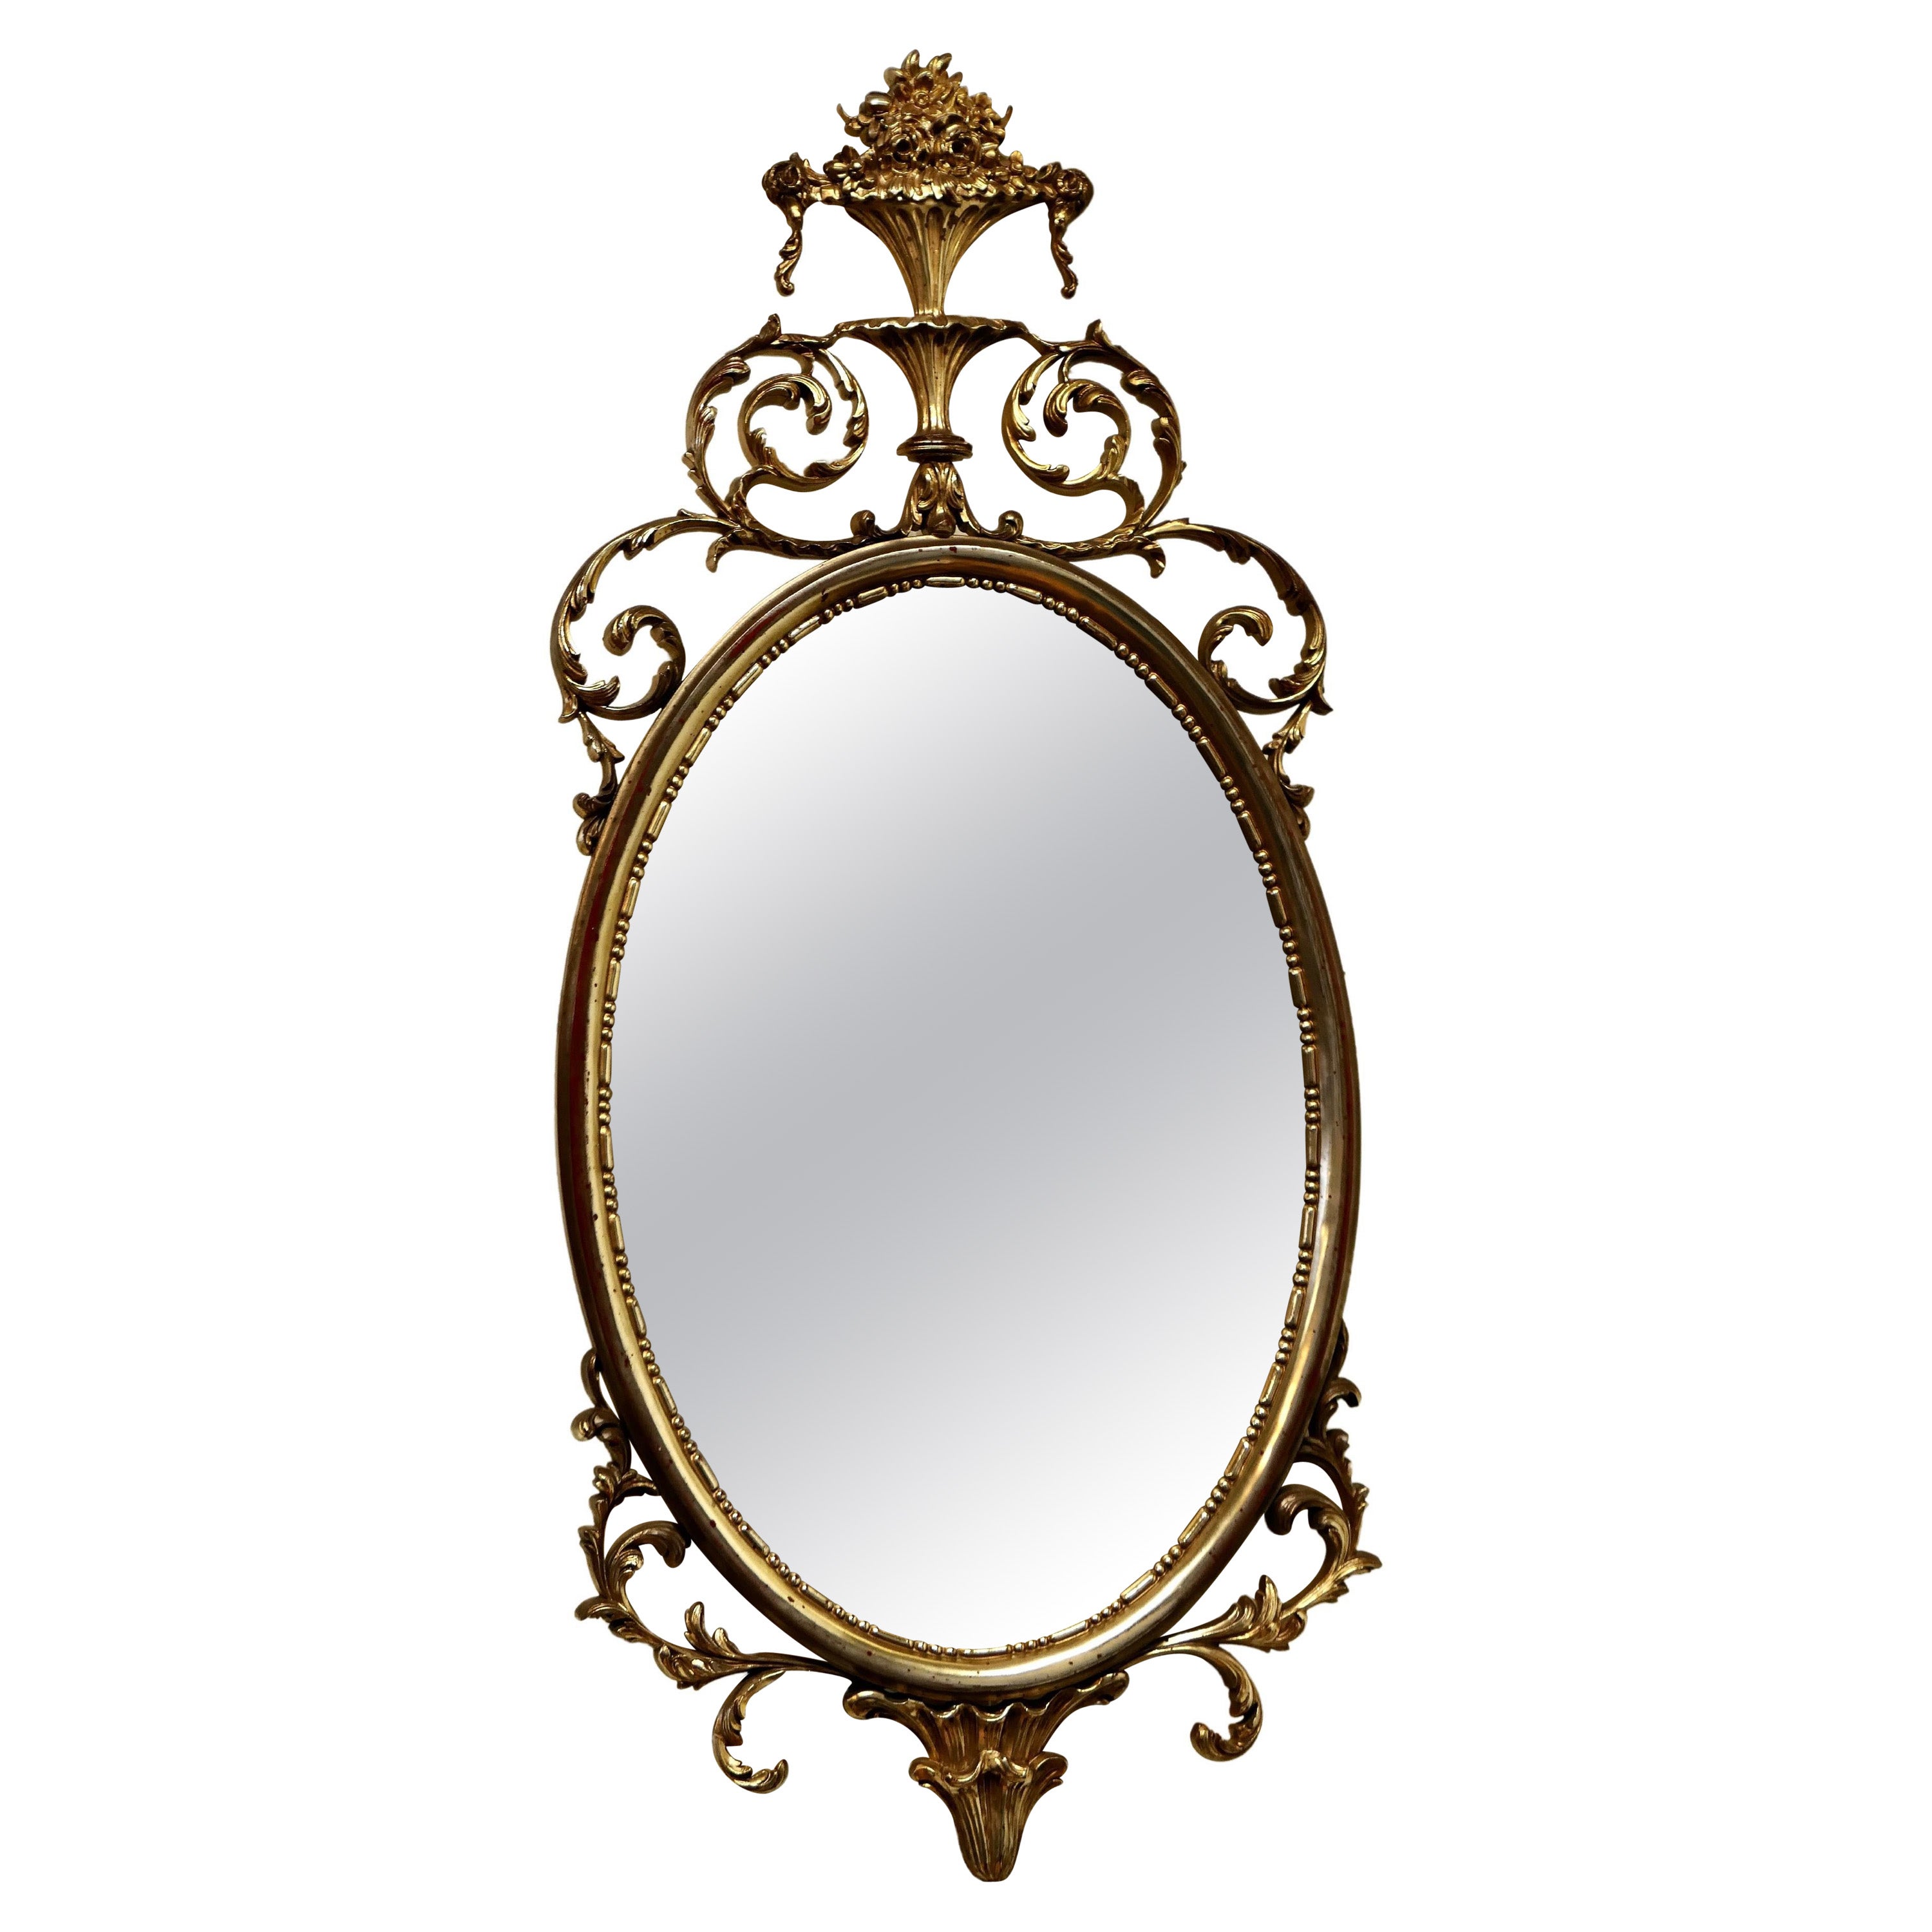 Large Gold Crested Rococo Style Oval Wall Mirror  For Sale